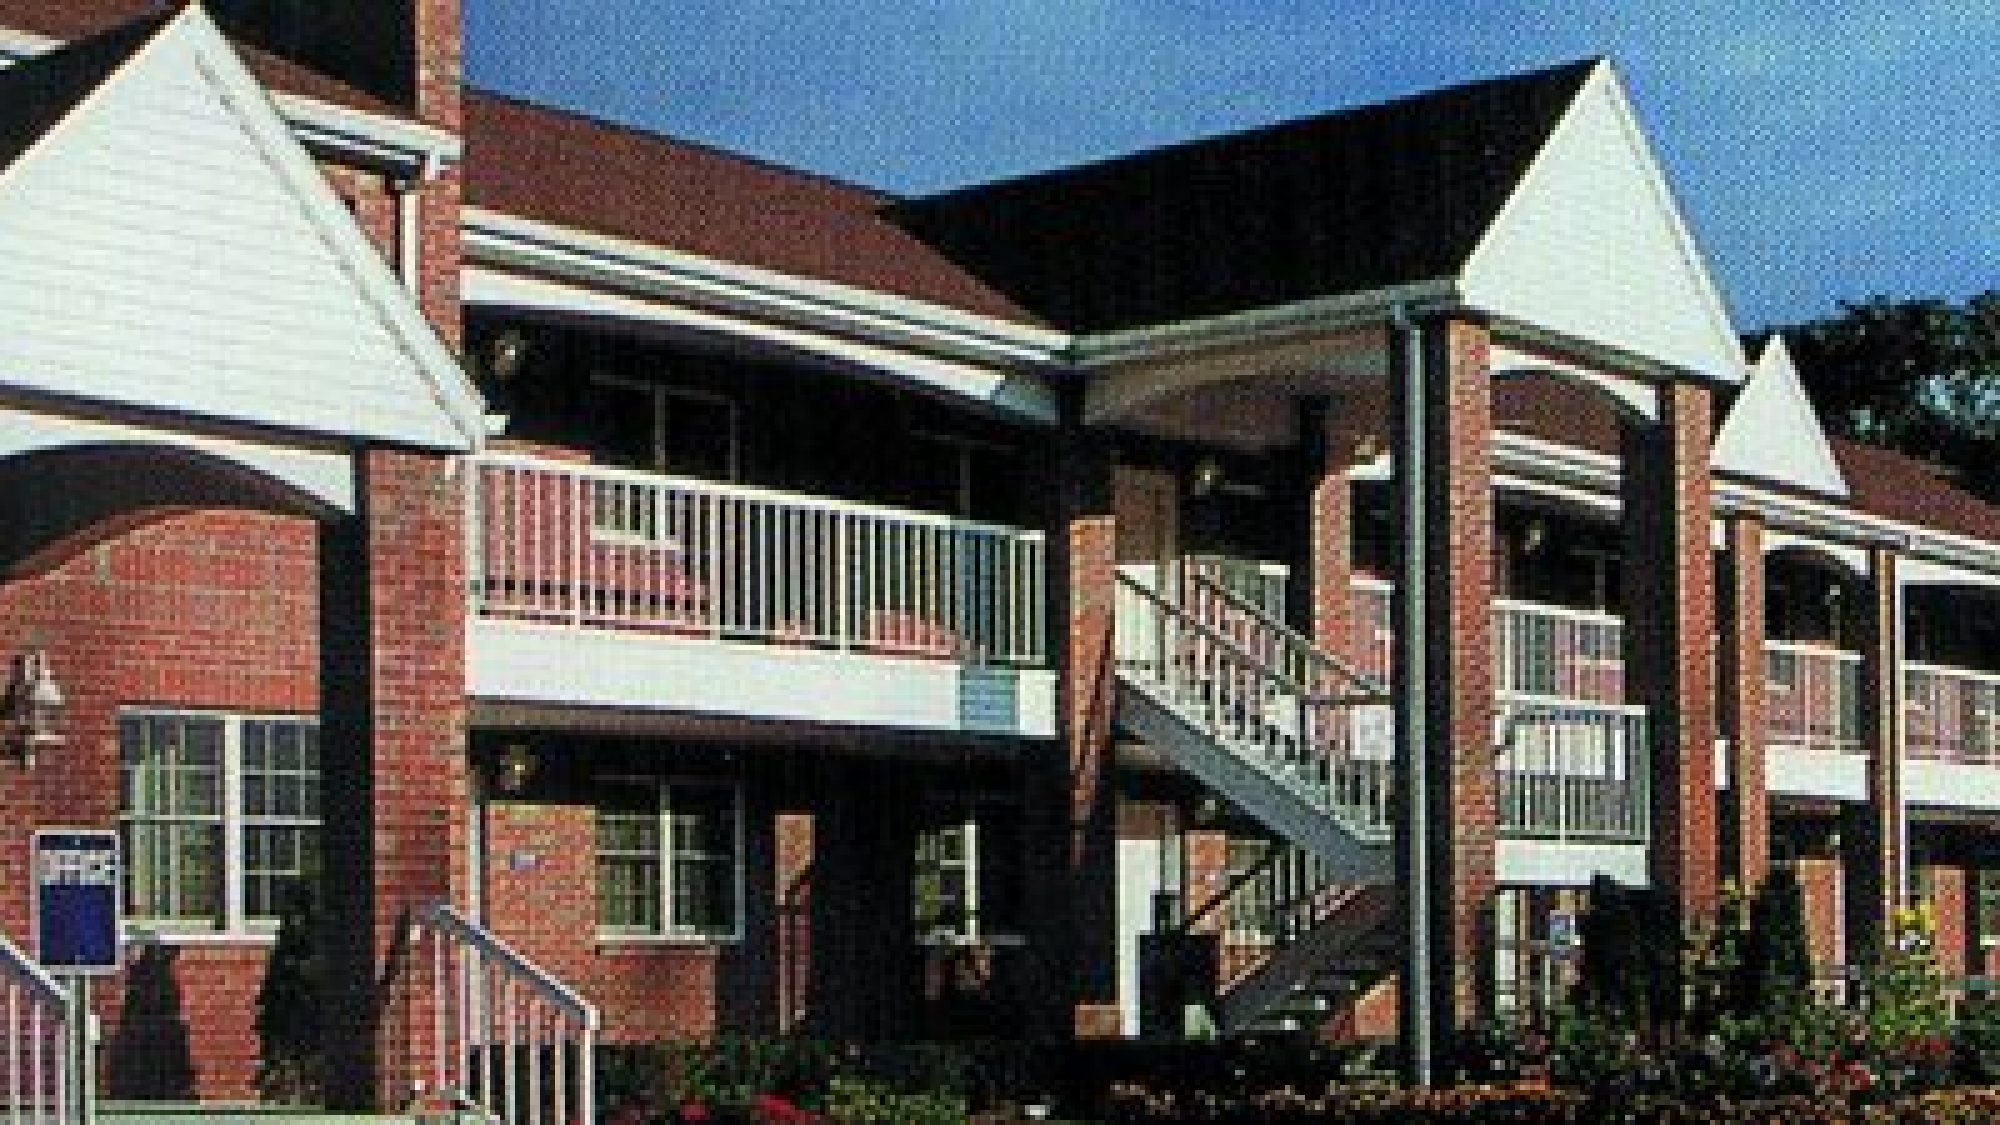 Outside view of balconies